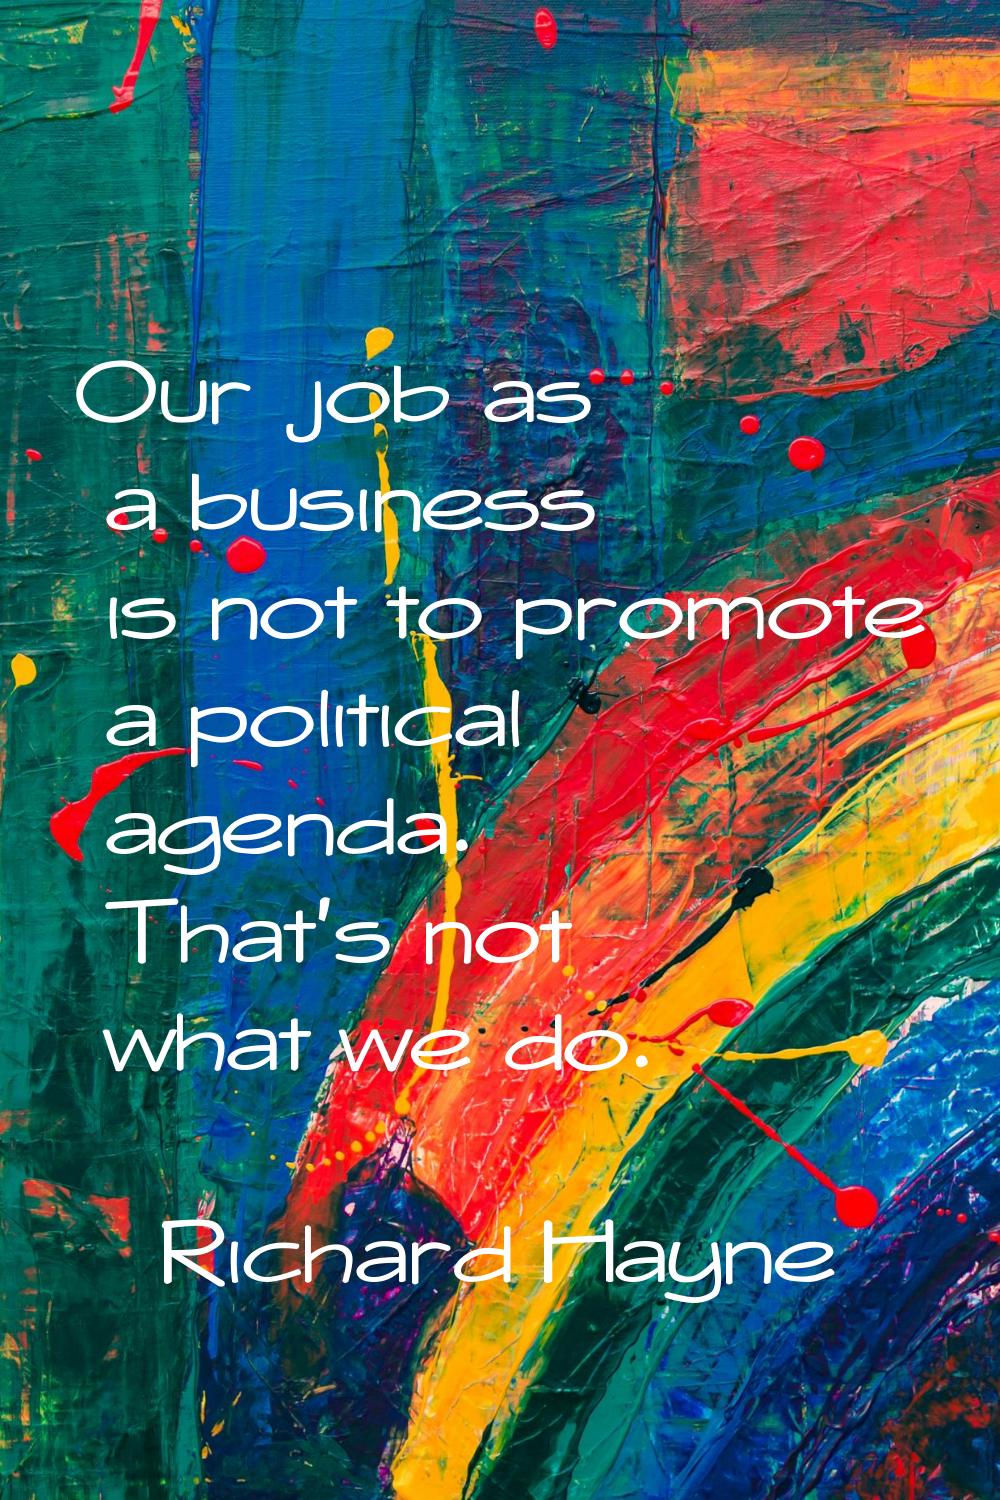 Our job as a business is not to promote a political agenda. That's not what we do.